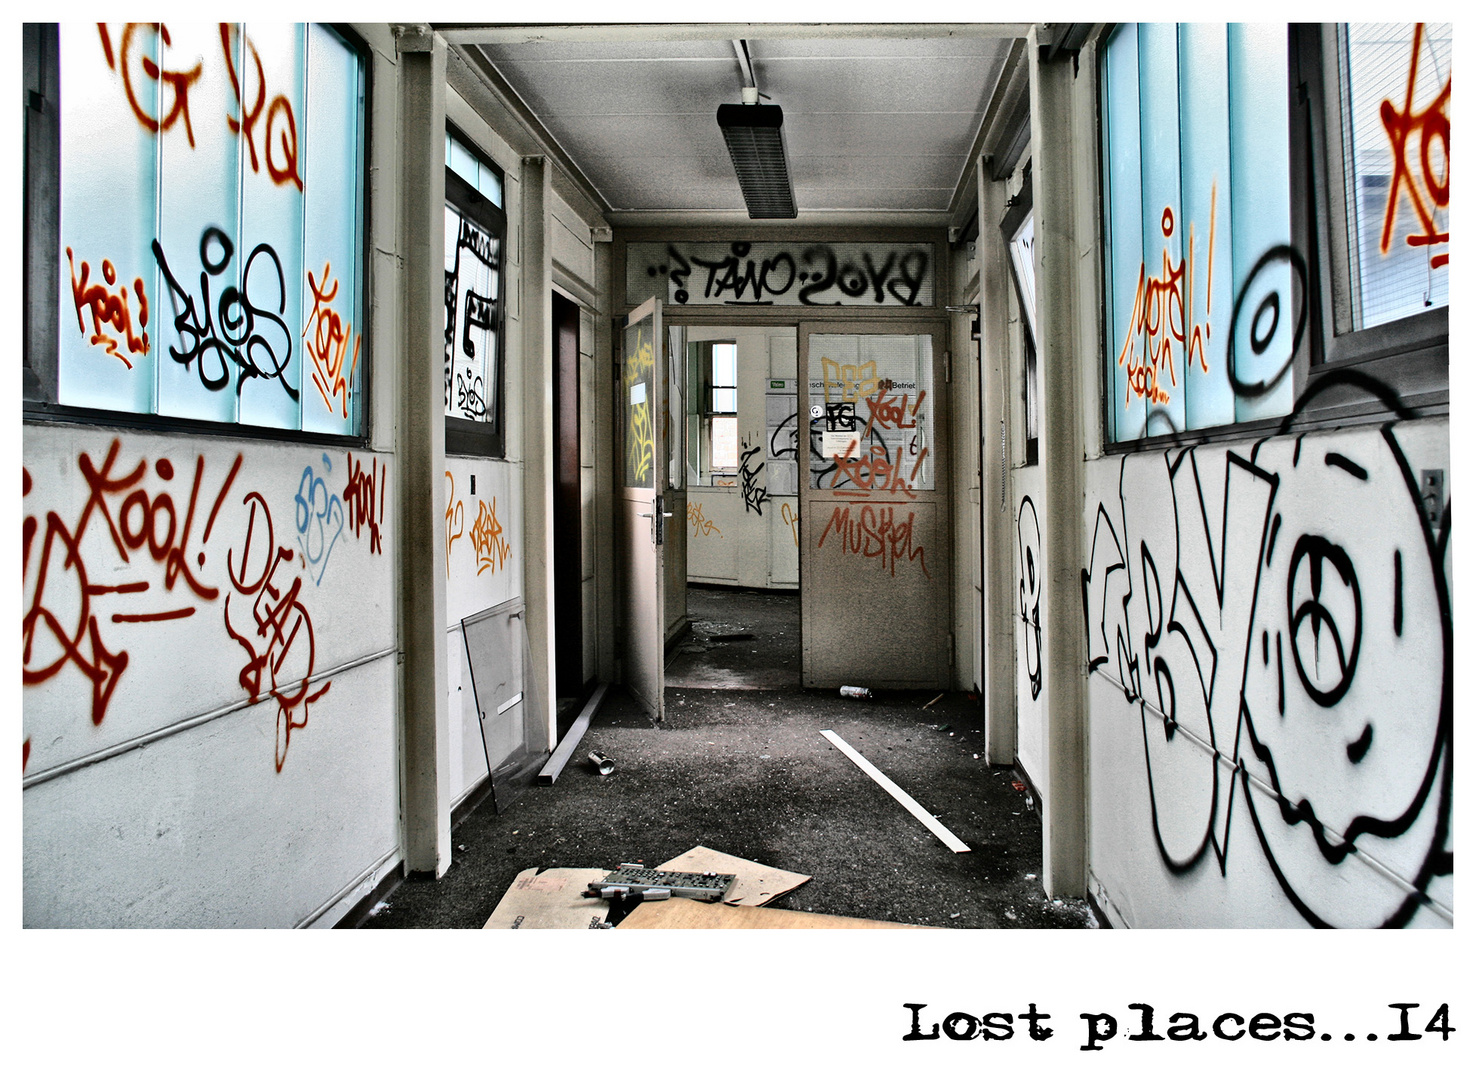 Lost places...14